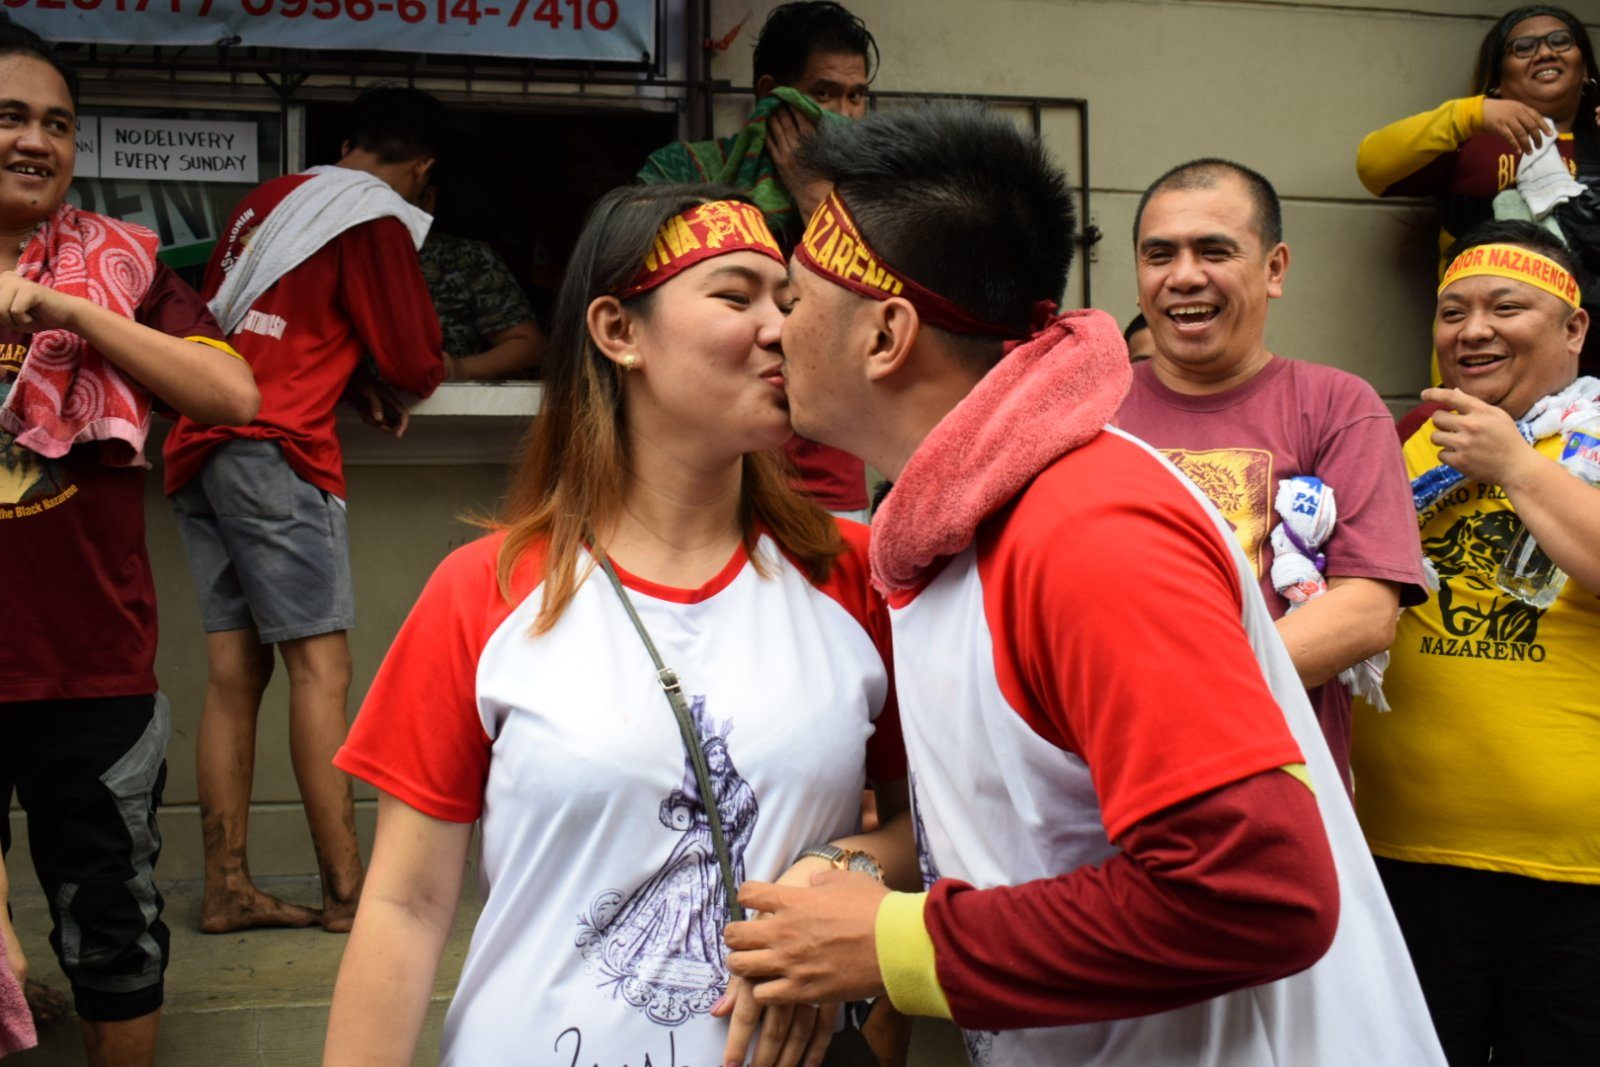 ‘Sana all’: Devotees cheer couple who got engaged during Traslacion 2020